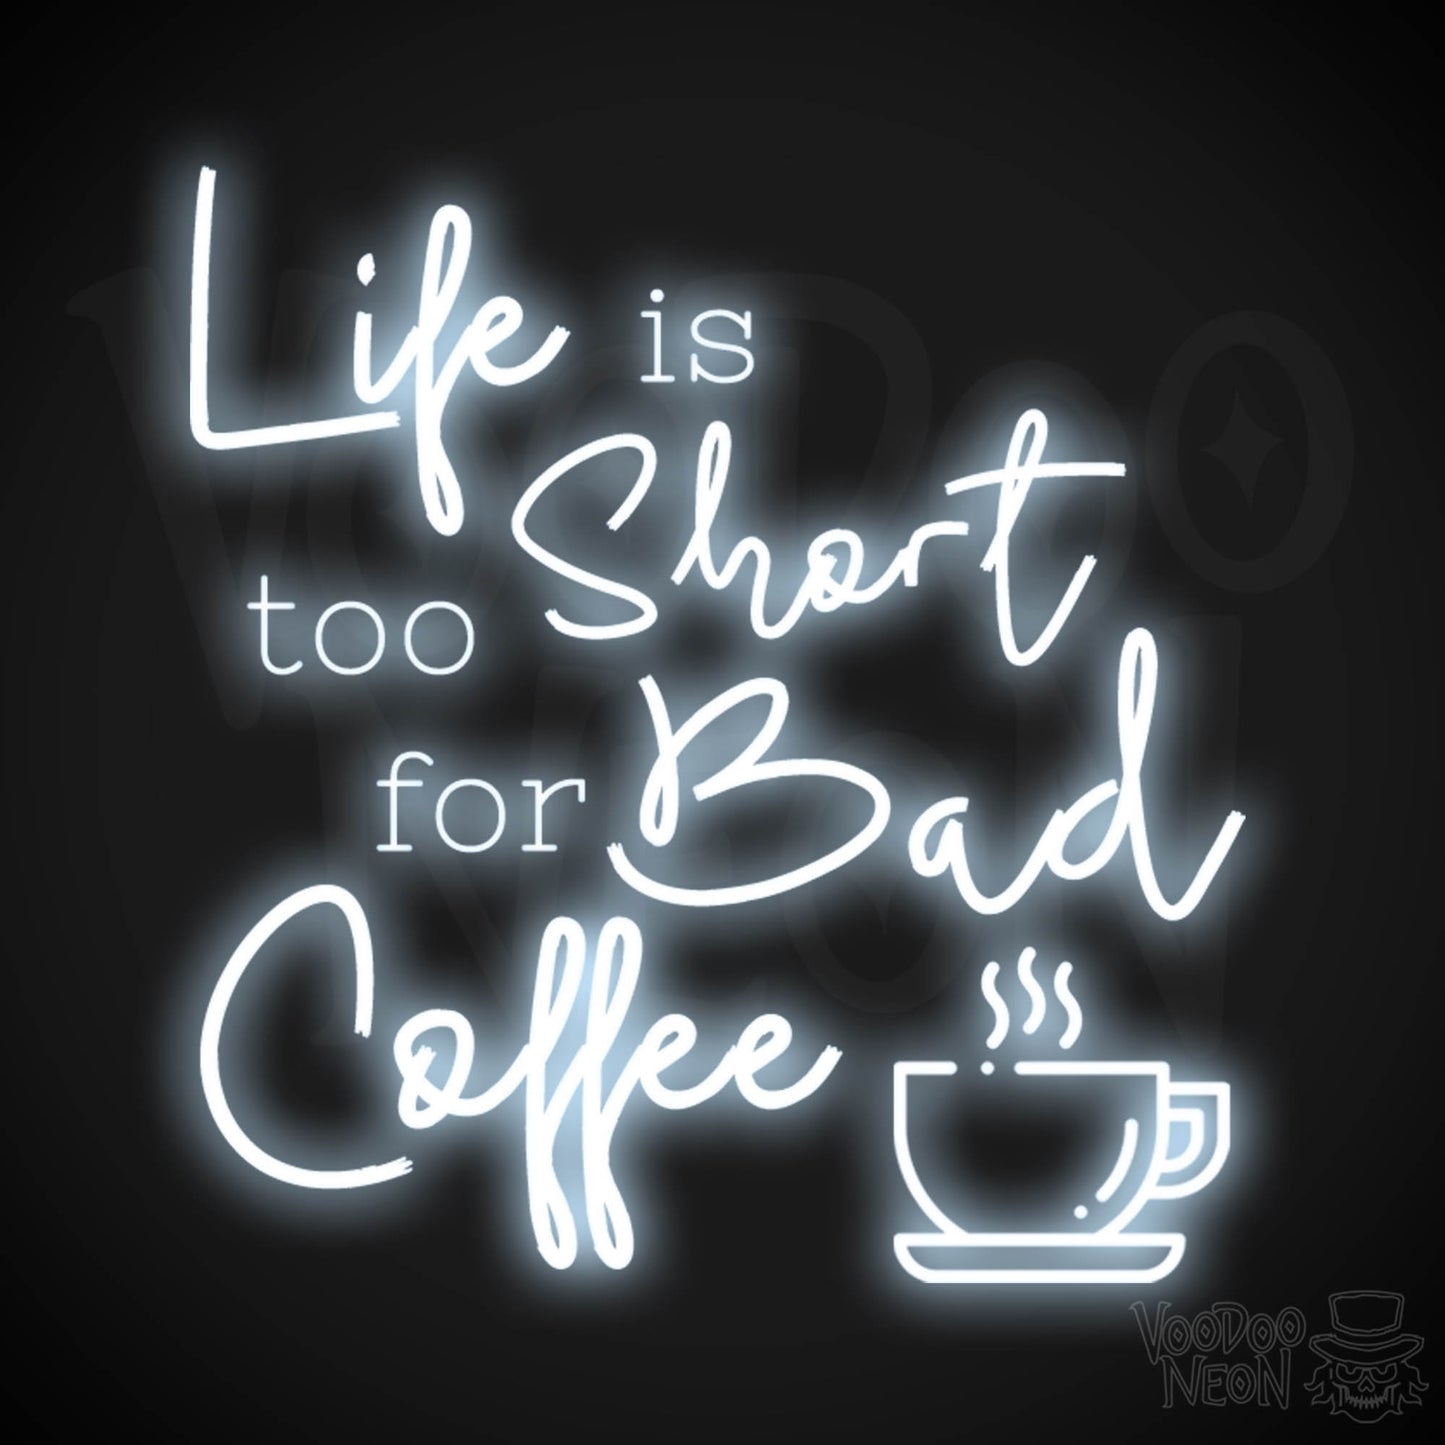 Life Is Too Short For Bad Coffee Neon Sign - Neon Life Is Too Short For Bad Coffee Sign - LED Neon Wall Art - Color Cool White